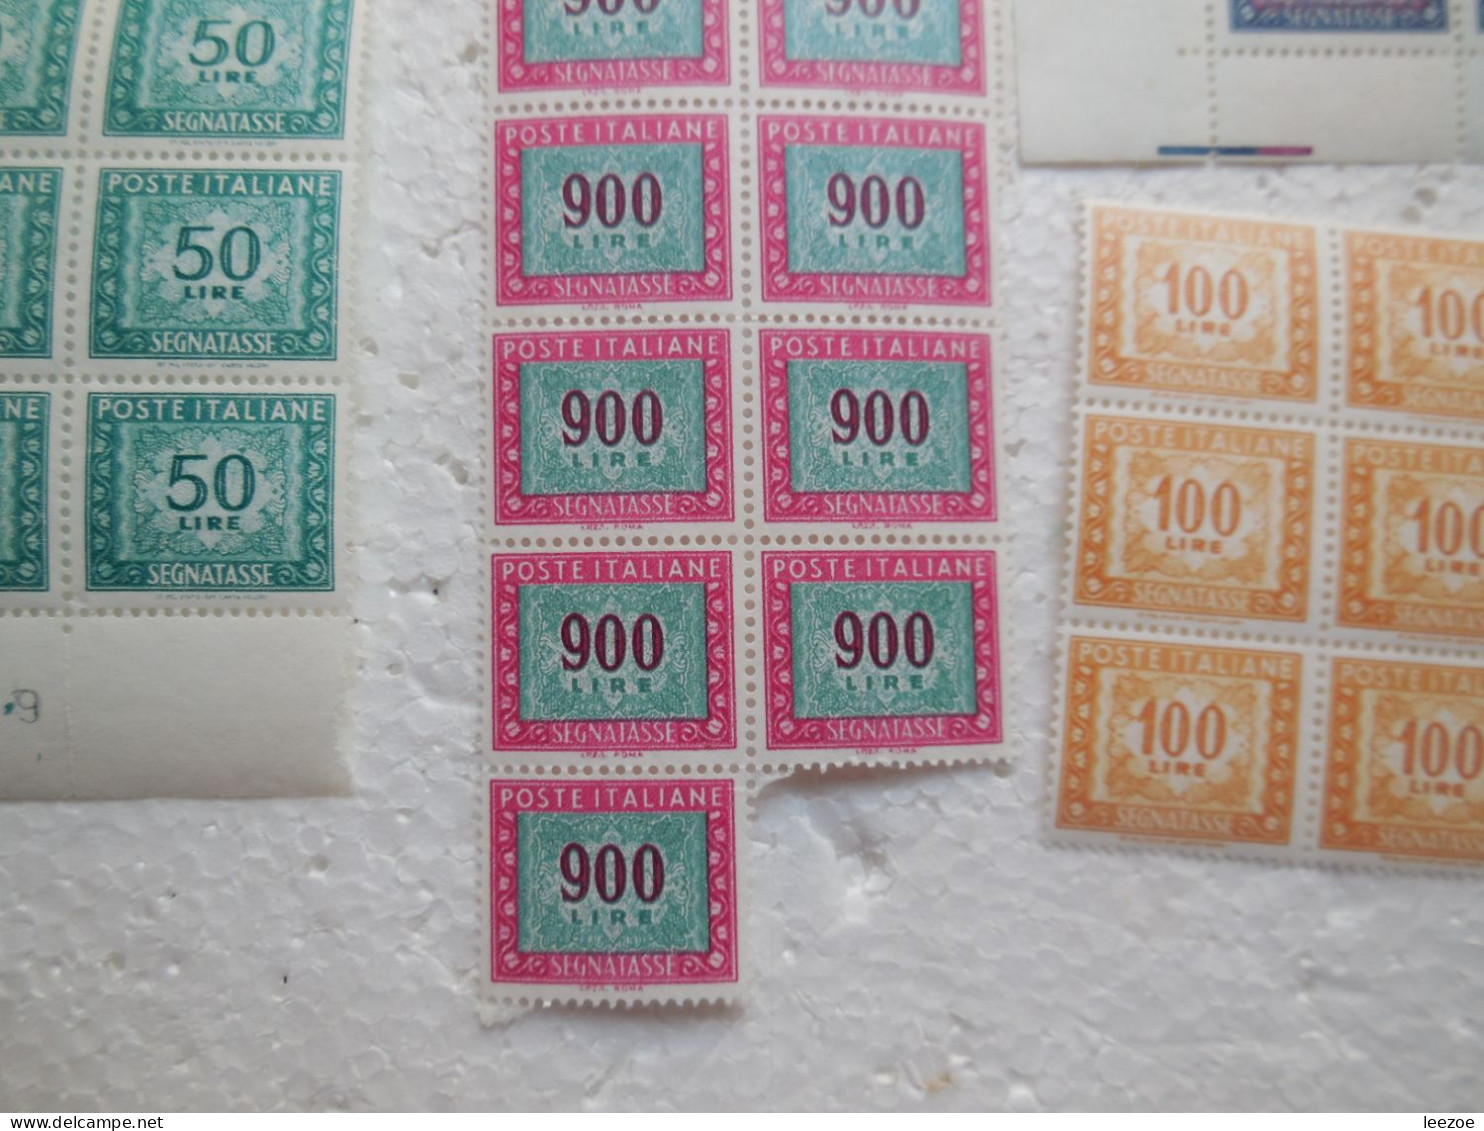 STAMP ITALIA SEGNATASSE, lot TIMBRES ITALIEN, timbres TAXES..  ...ref N5/40/8